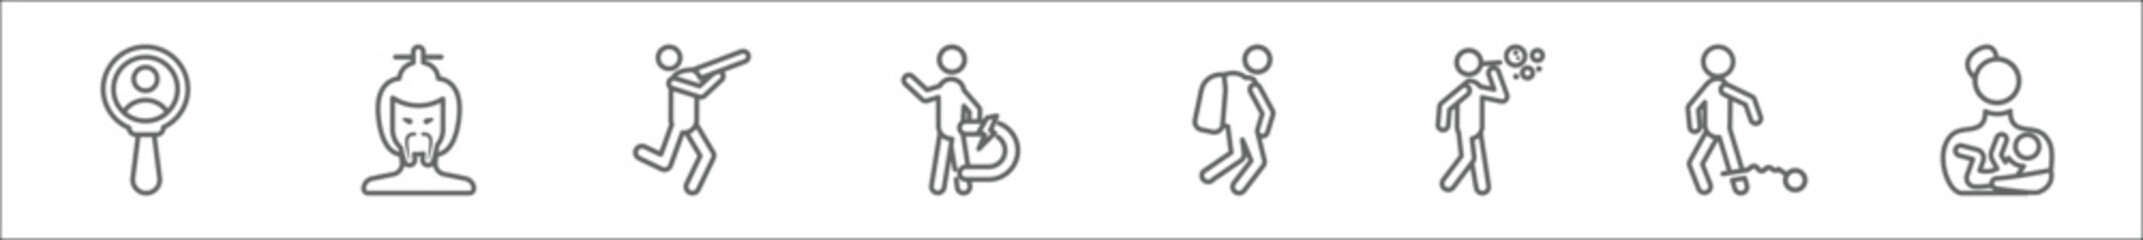 outline set of people line icons. linear vector icons such as male users, chinese man, dancing man, electromagnet, walking to school, man making soap bubbles, war prisioner, breastfeeding